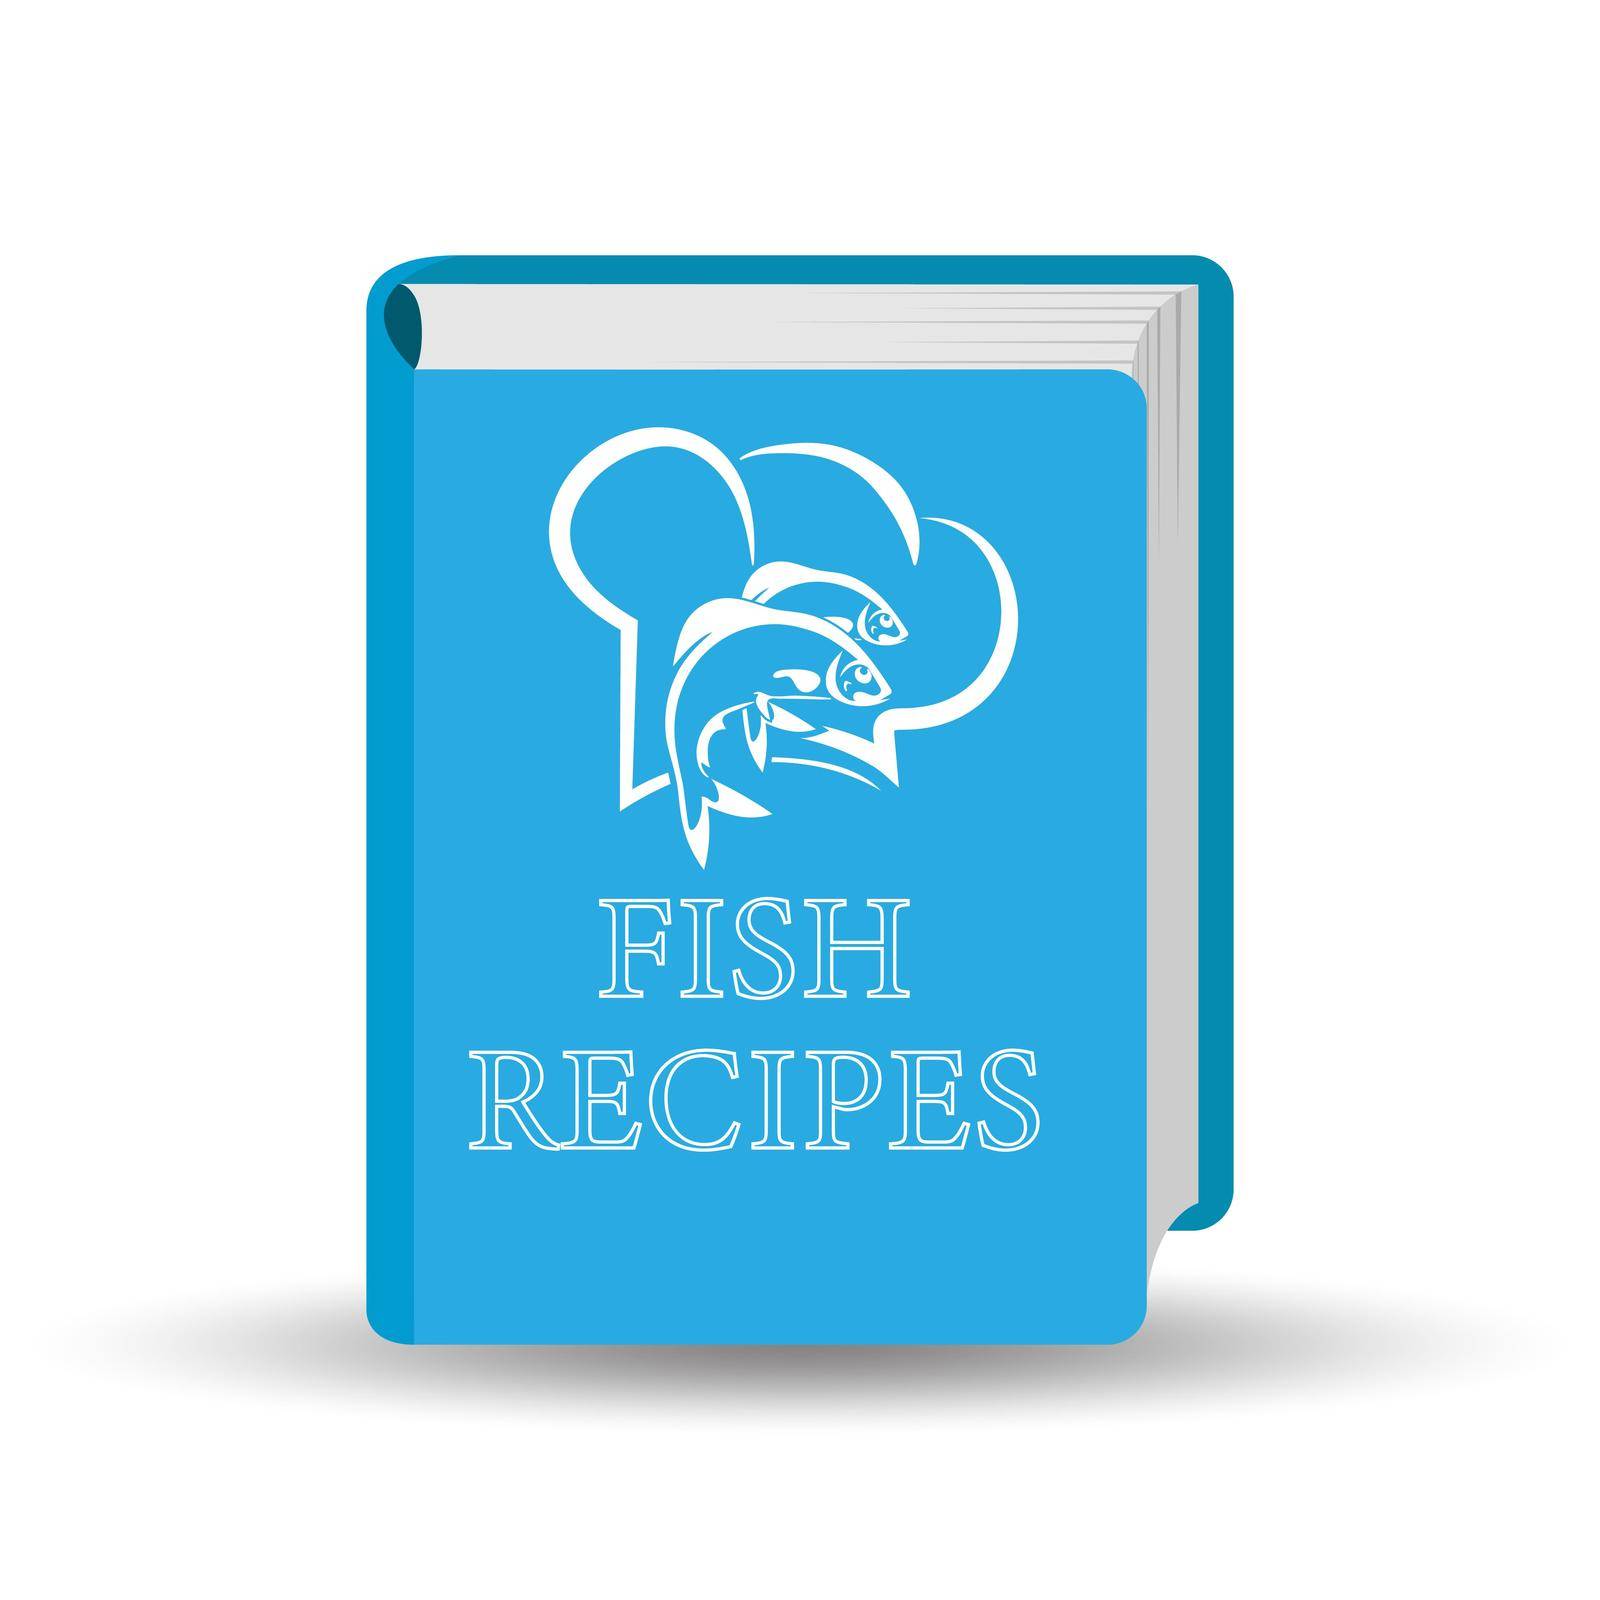 Books with fish recipes. Vector illustration, for websites, apps, and creative design by Grommik